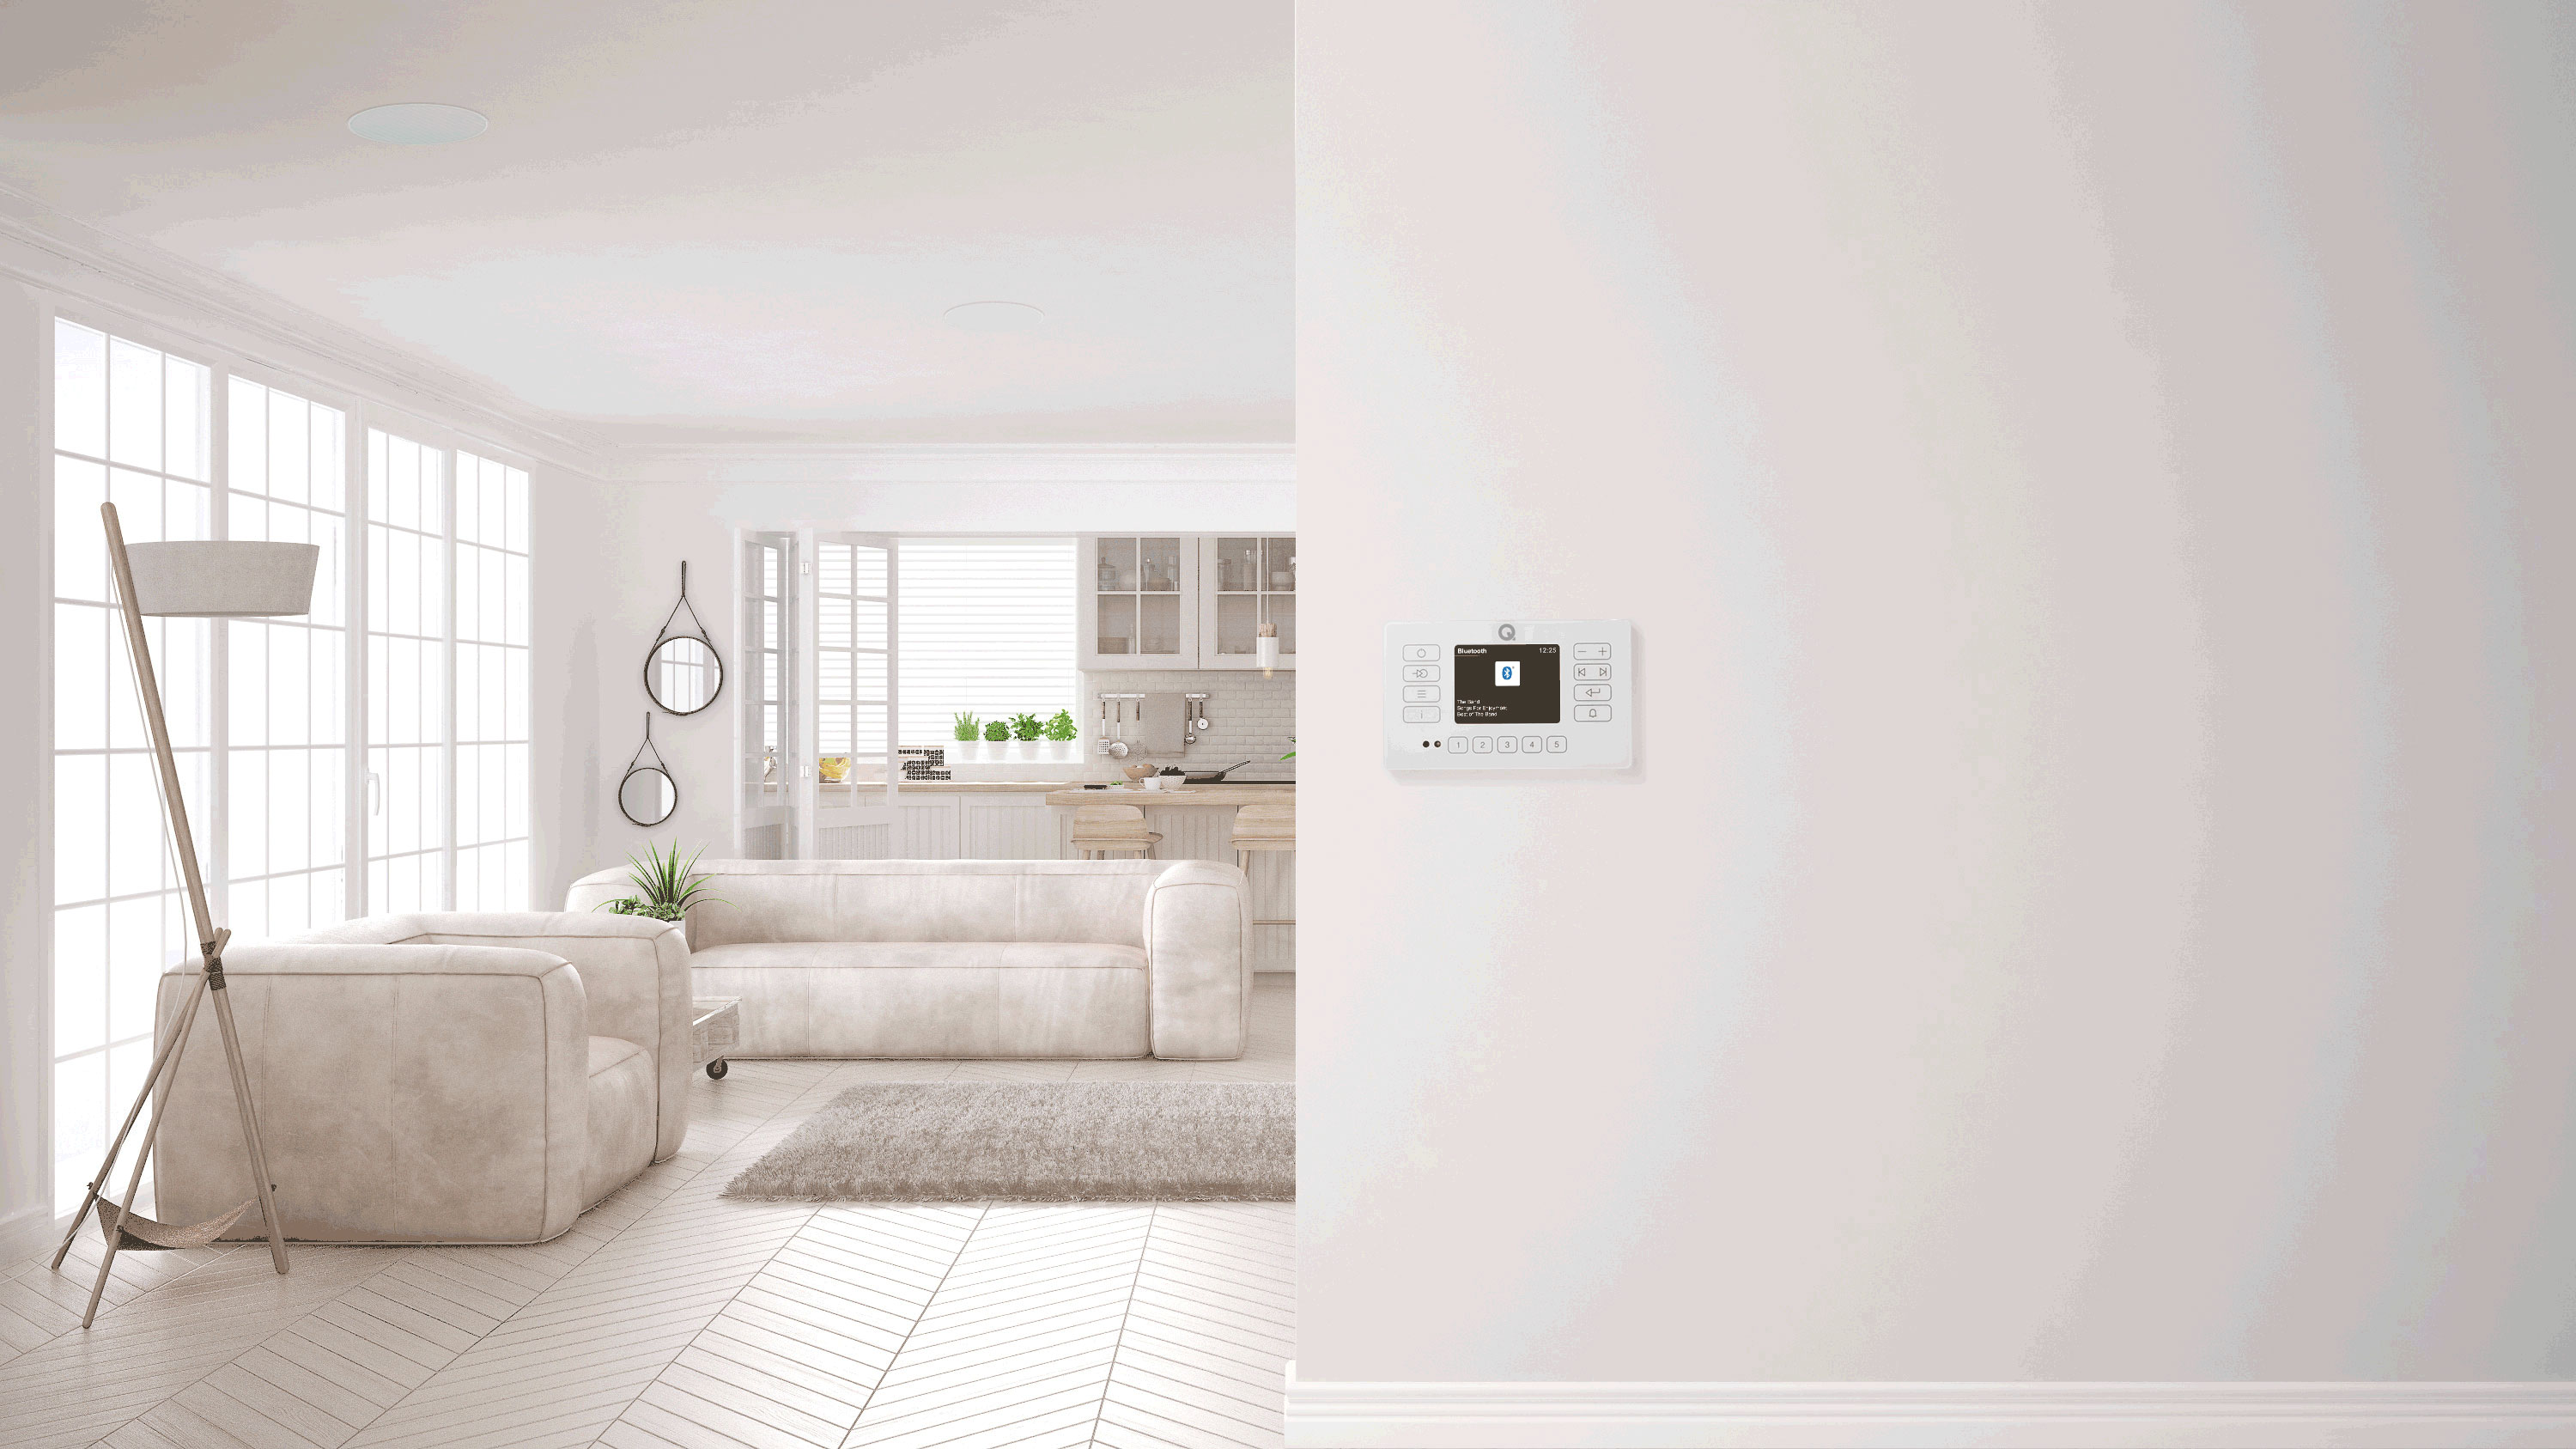 E120 with Q Acoustics in-ceiling and in-wall speaker recommended combinations